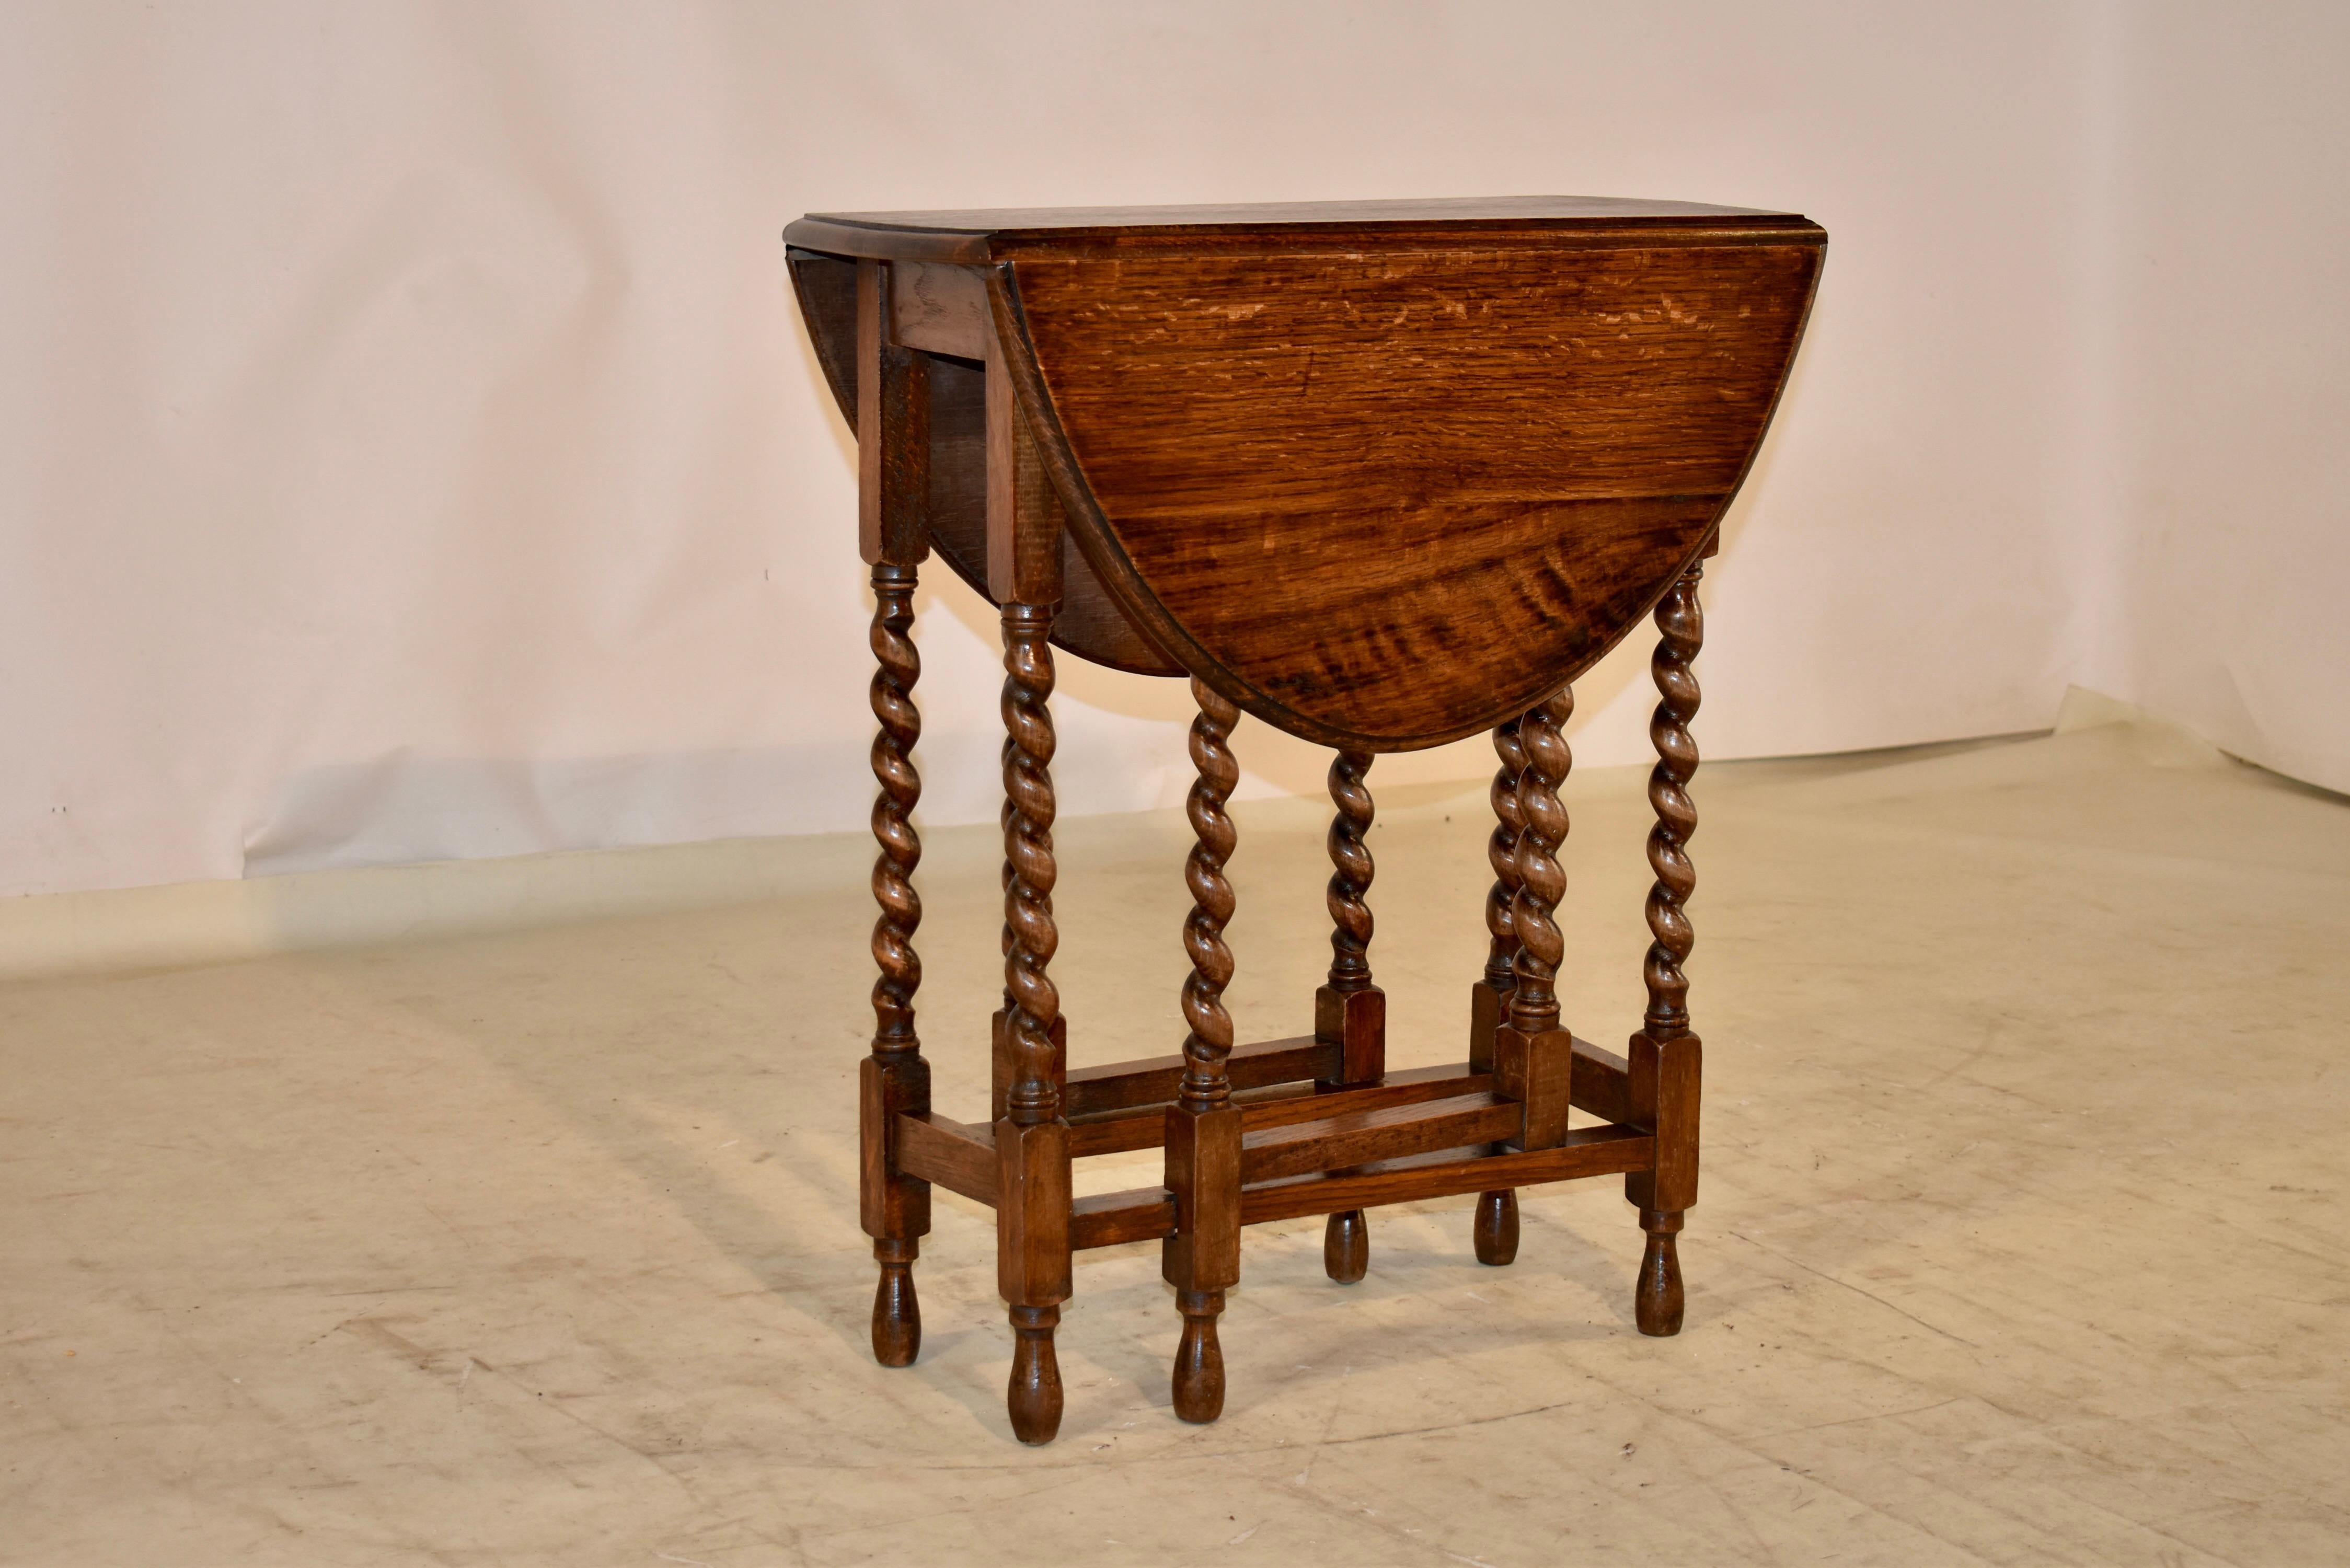 Edwardian oak gate leg table, c. 1900. The table has a beveled edge around the top, following down to a simple apron. The table is supported on hand turned barley twist legs, joined by simple stretchers and raised on hand turned feet. The table top